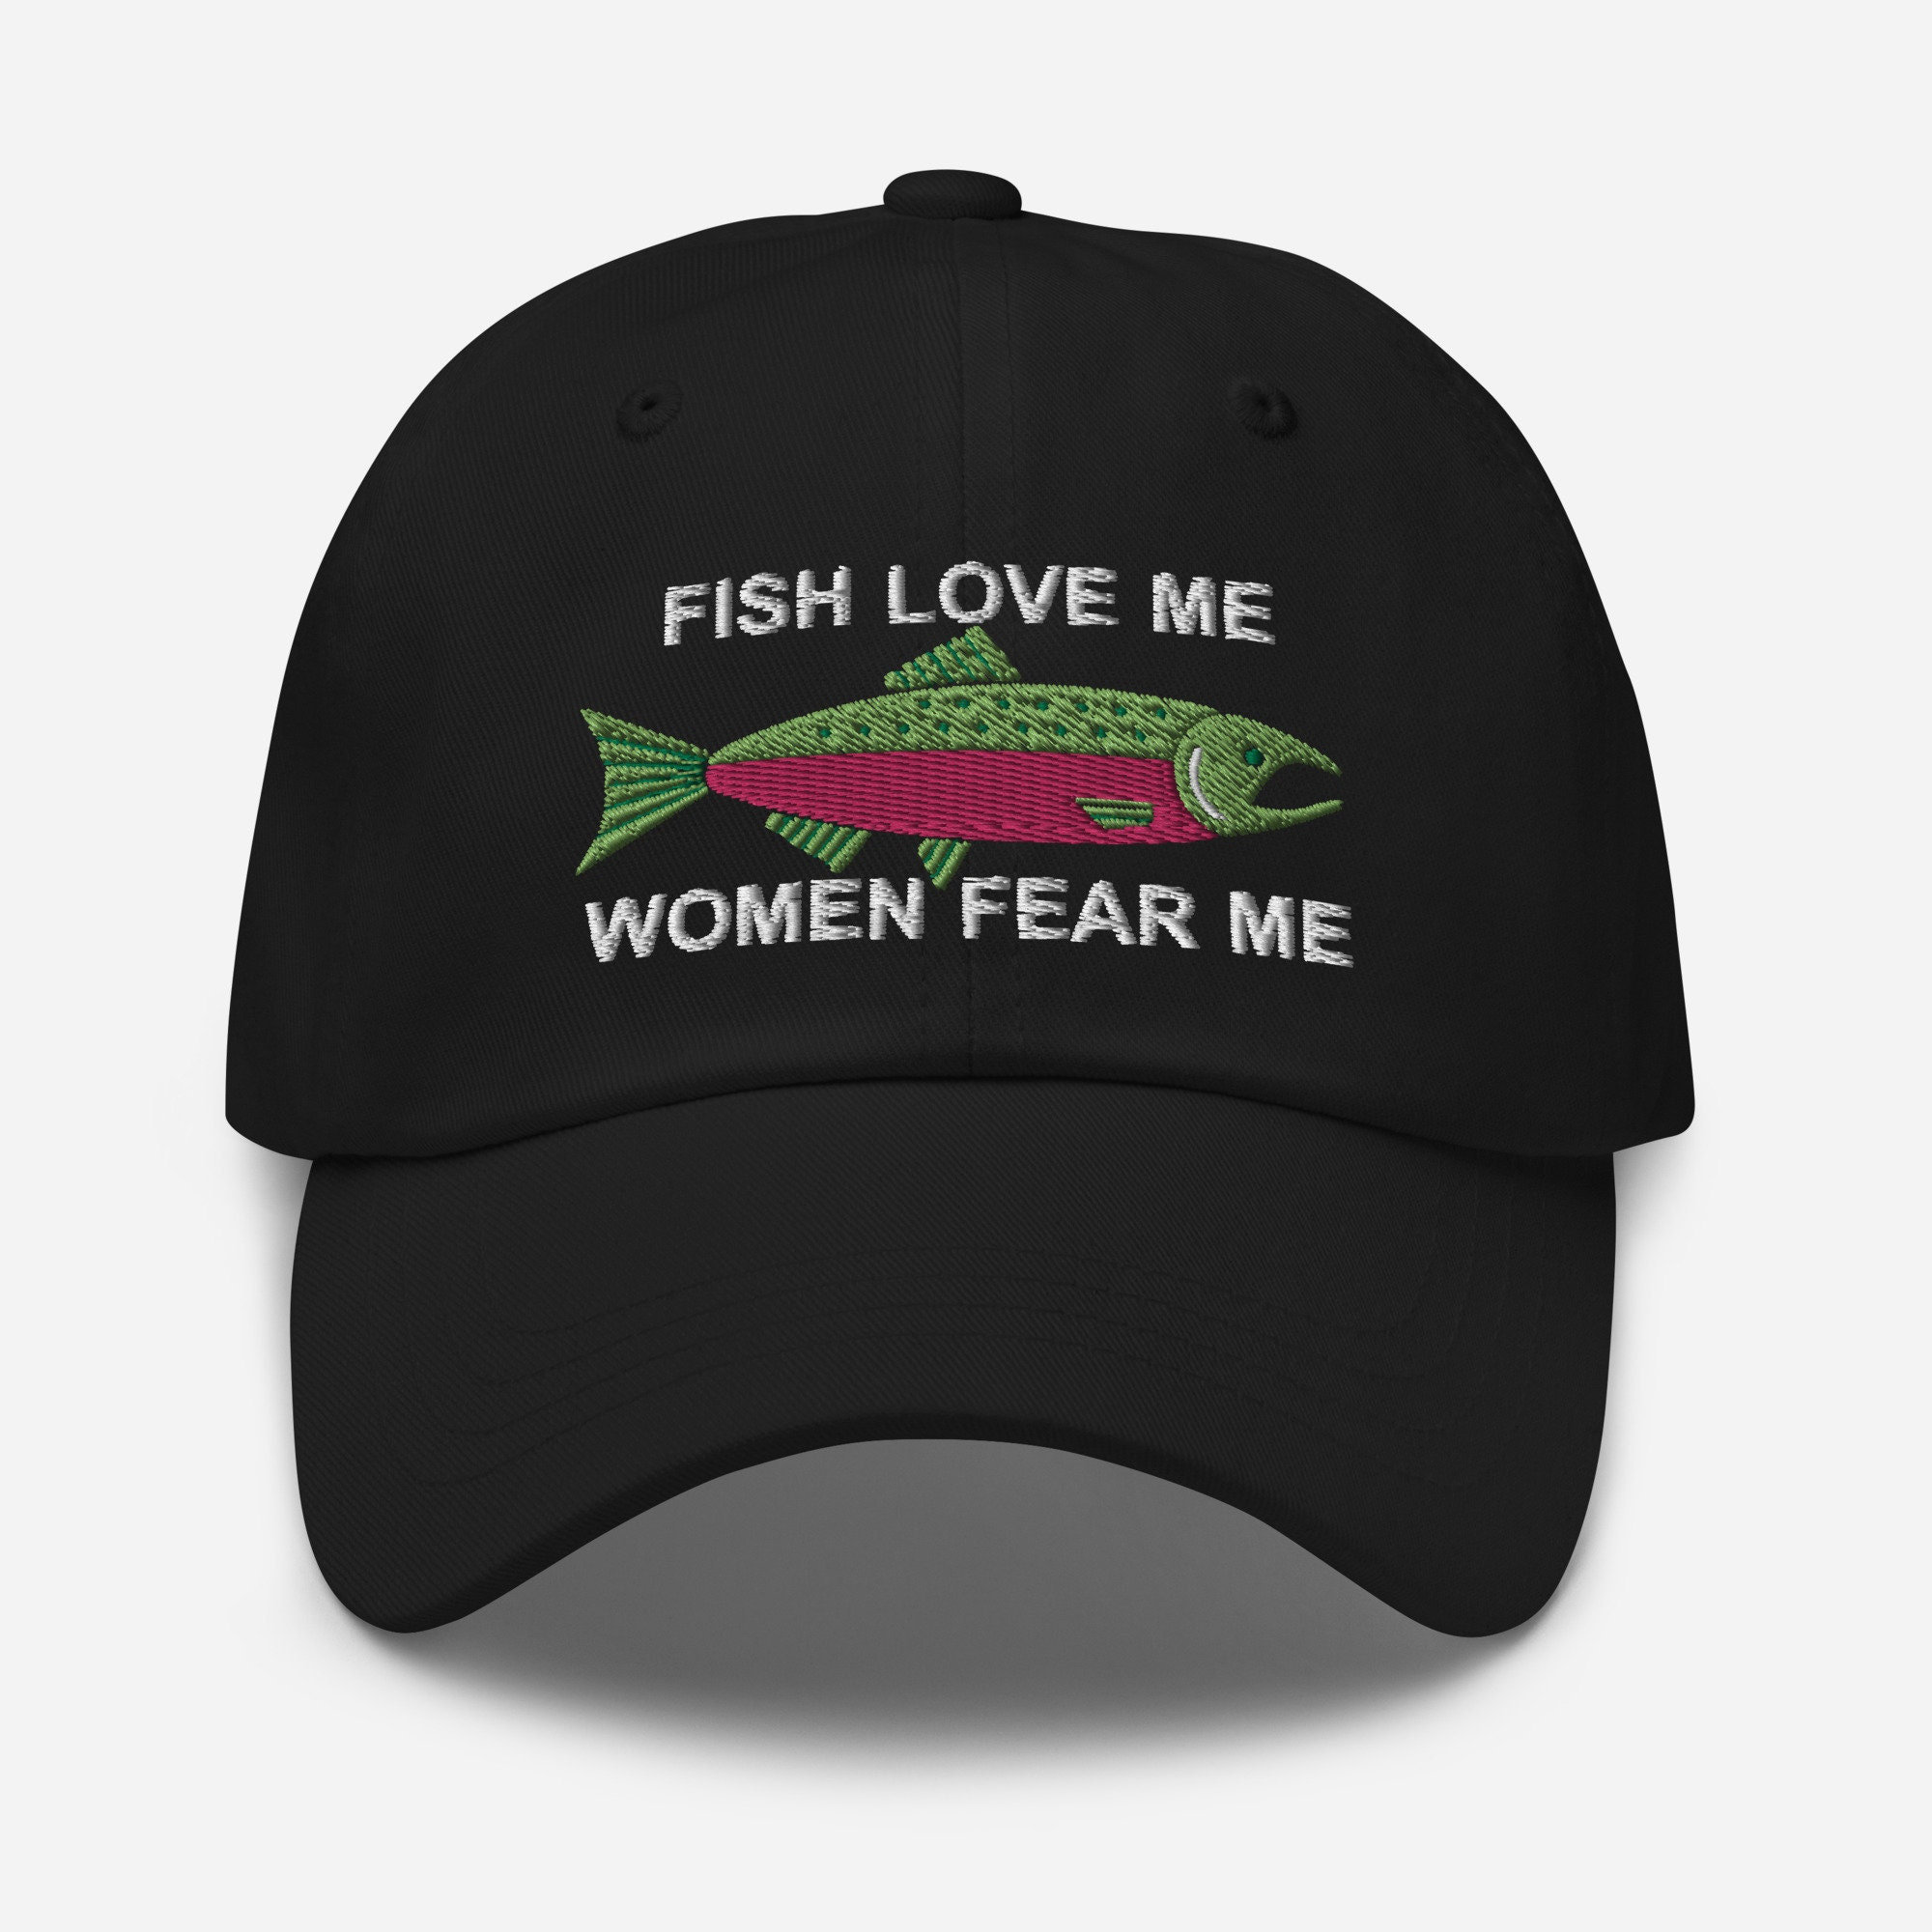 Fish Love Me Women Fear Me Hat Embroidered Fishing Cap W/ Salmon